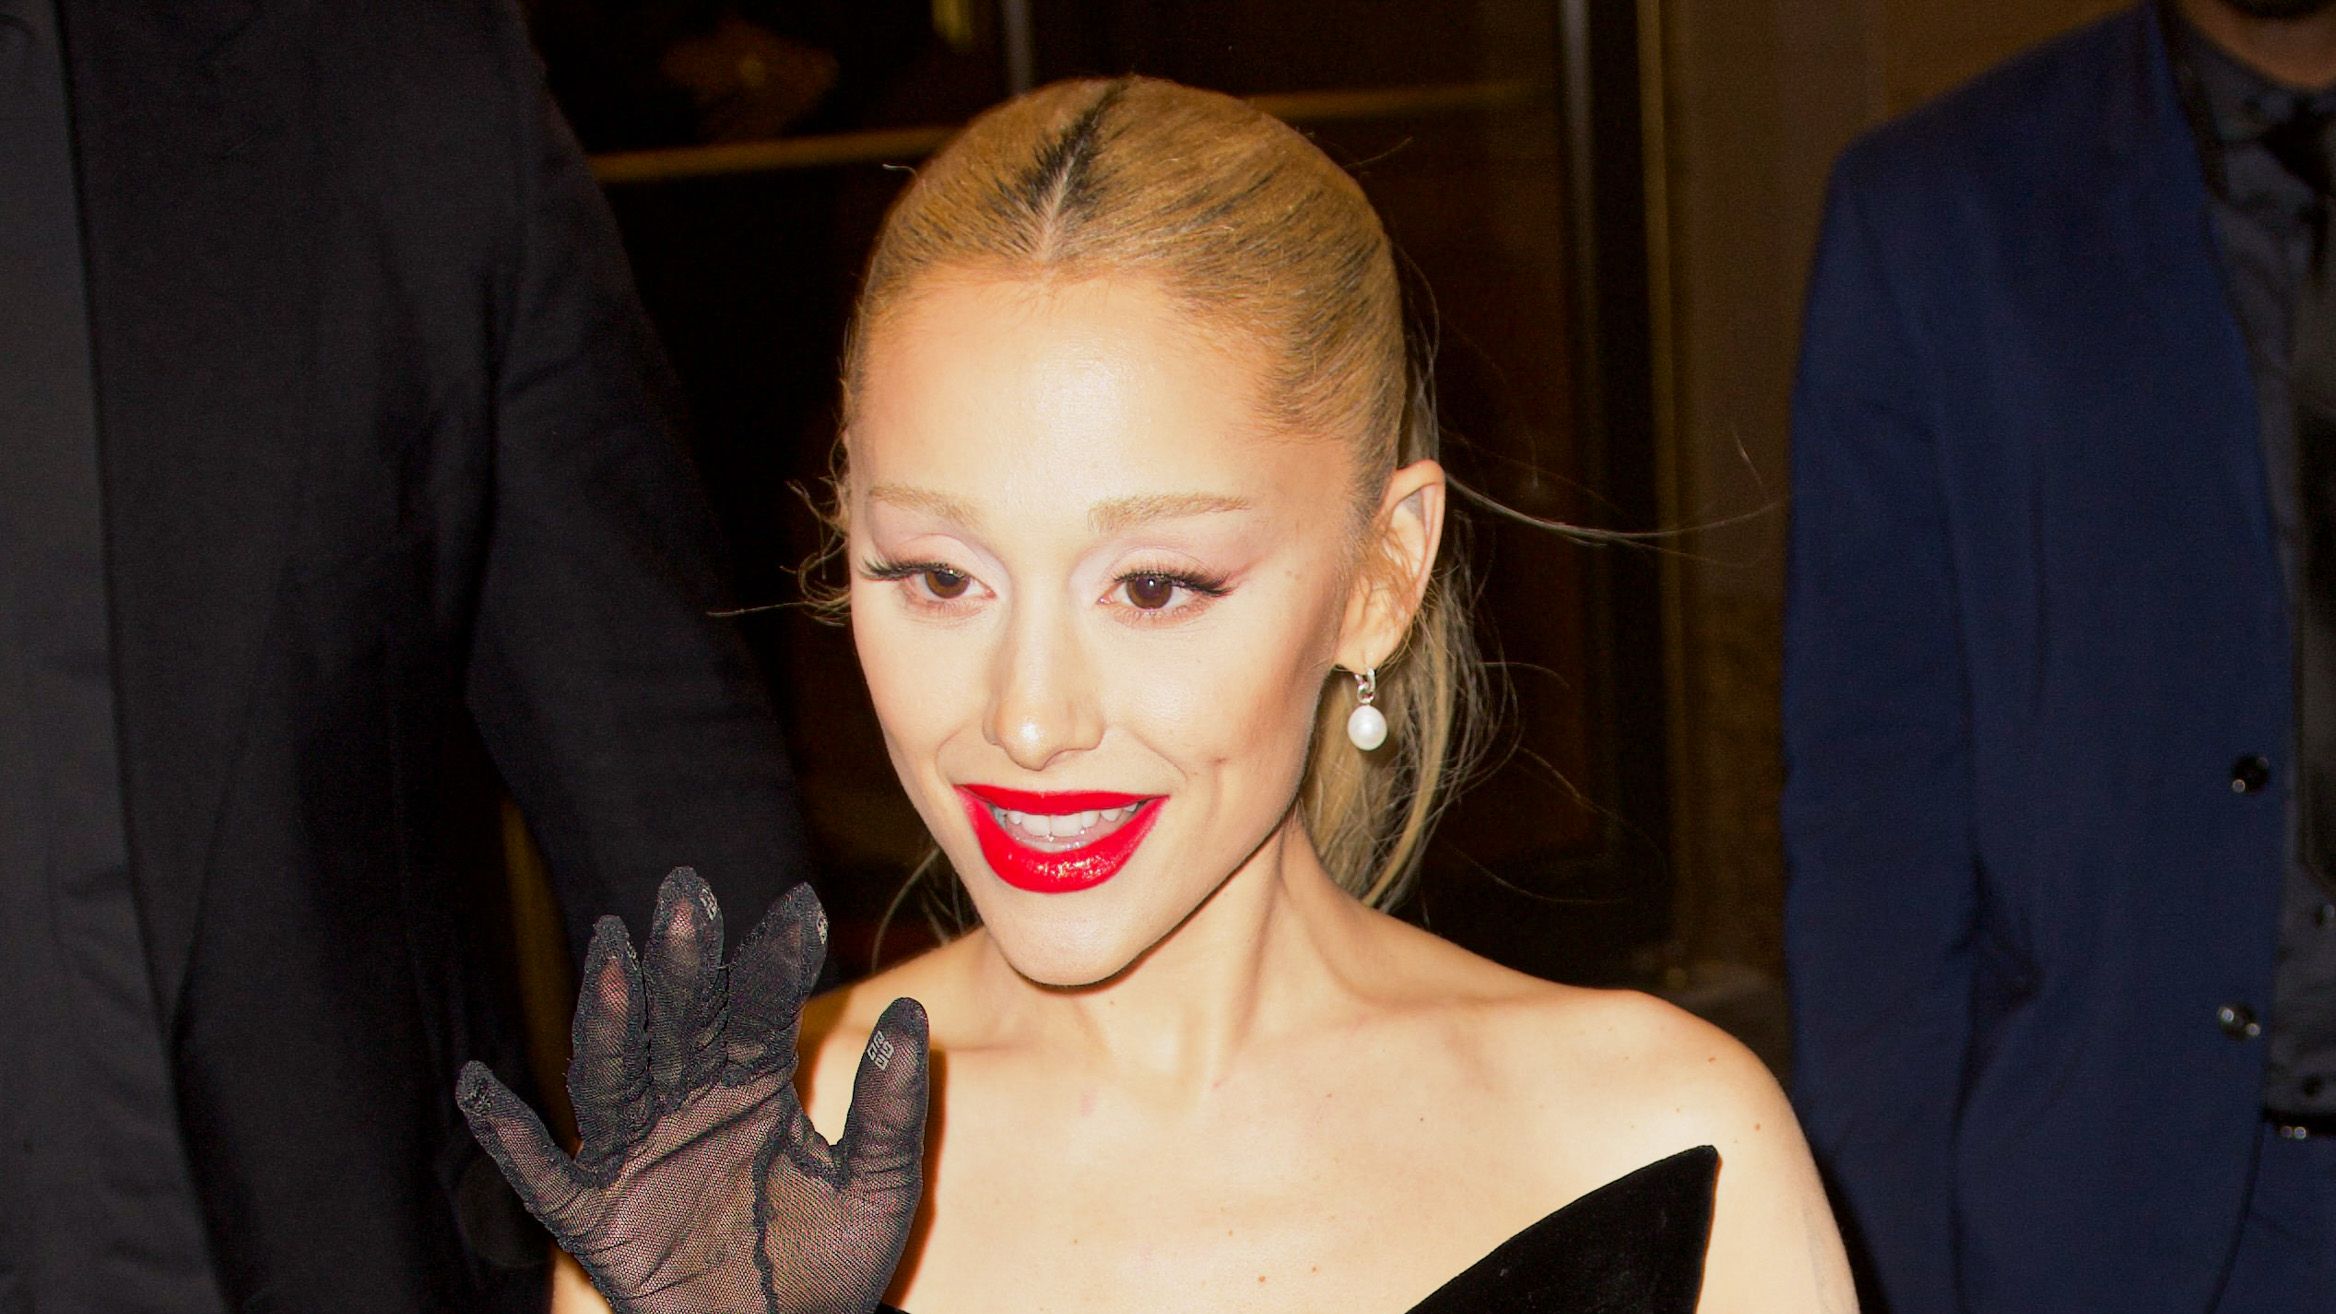 Ariana Grande News, Pictures, and Videos - E! Online